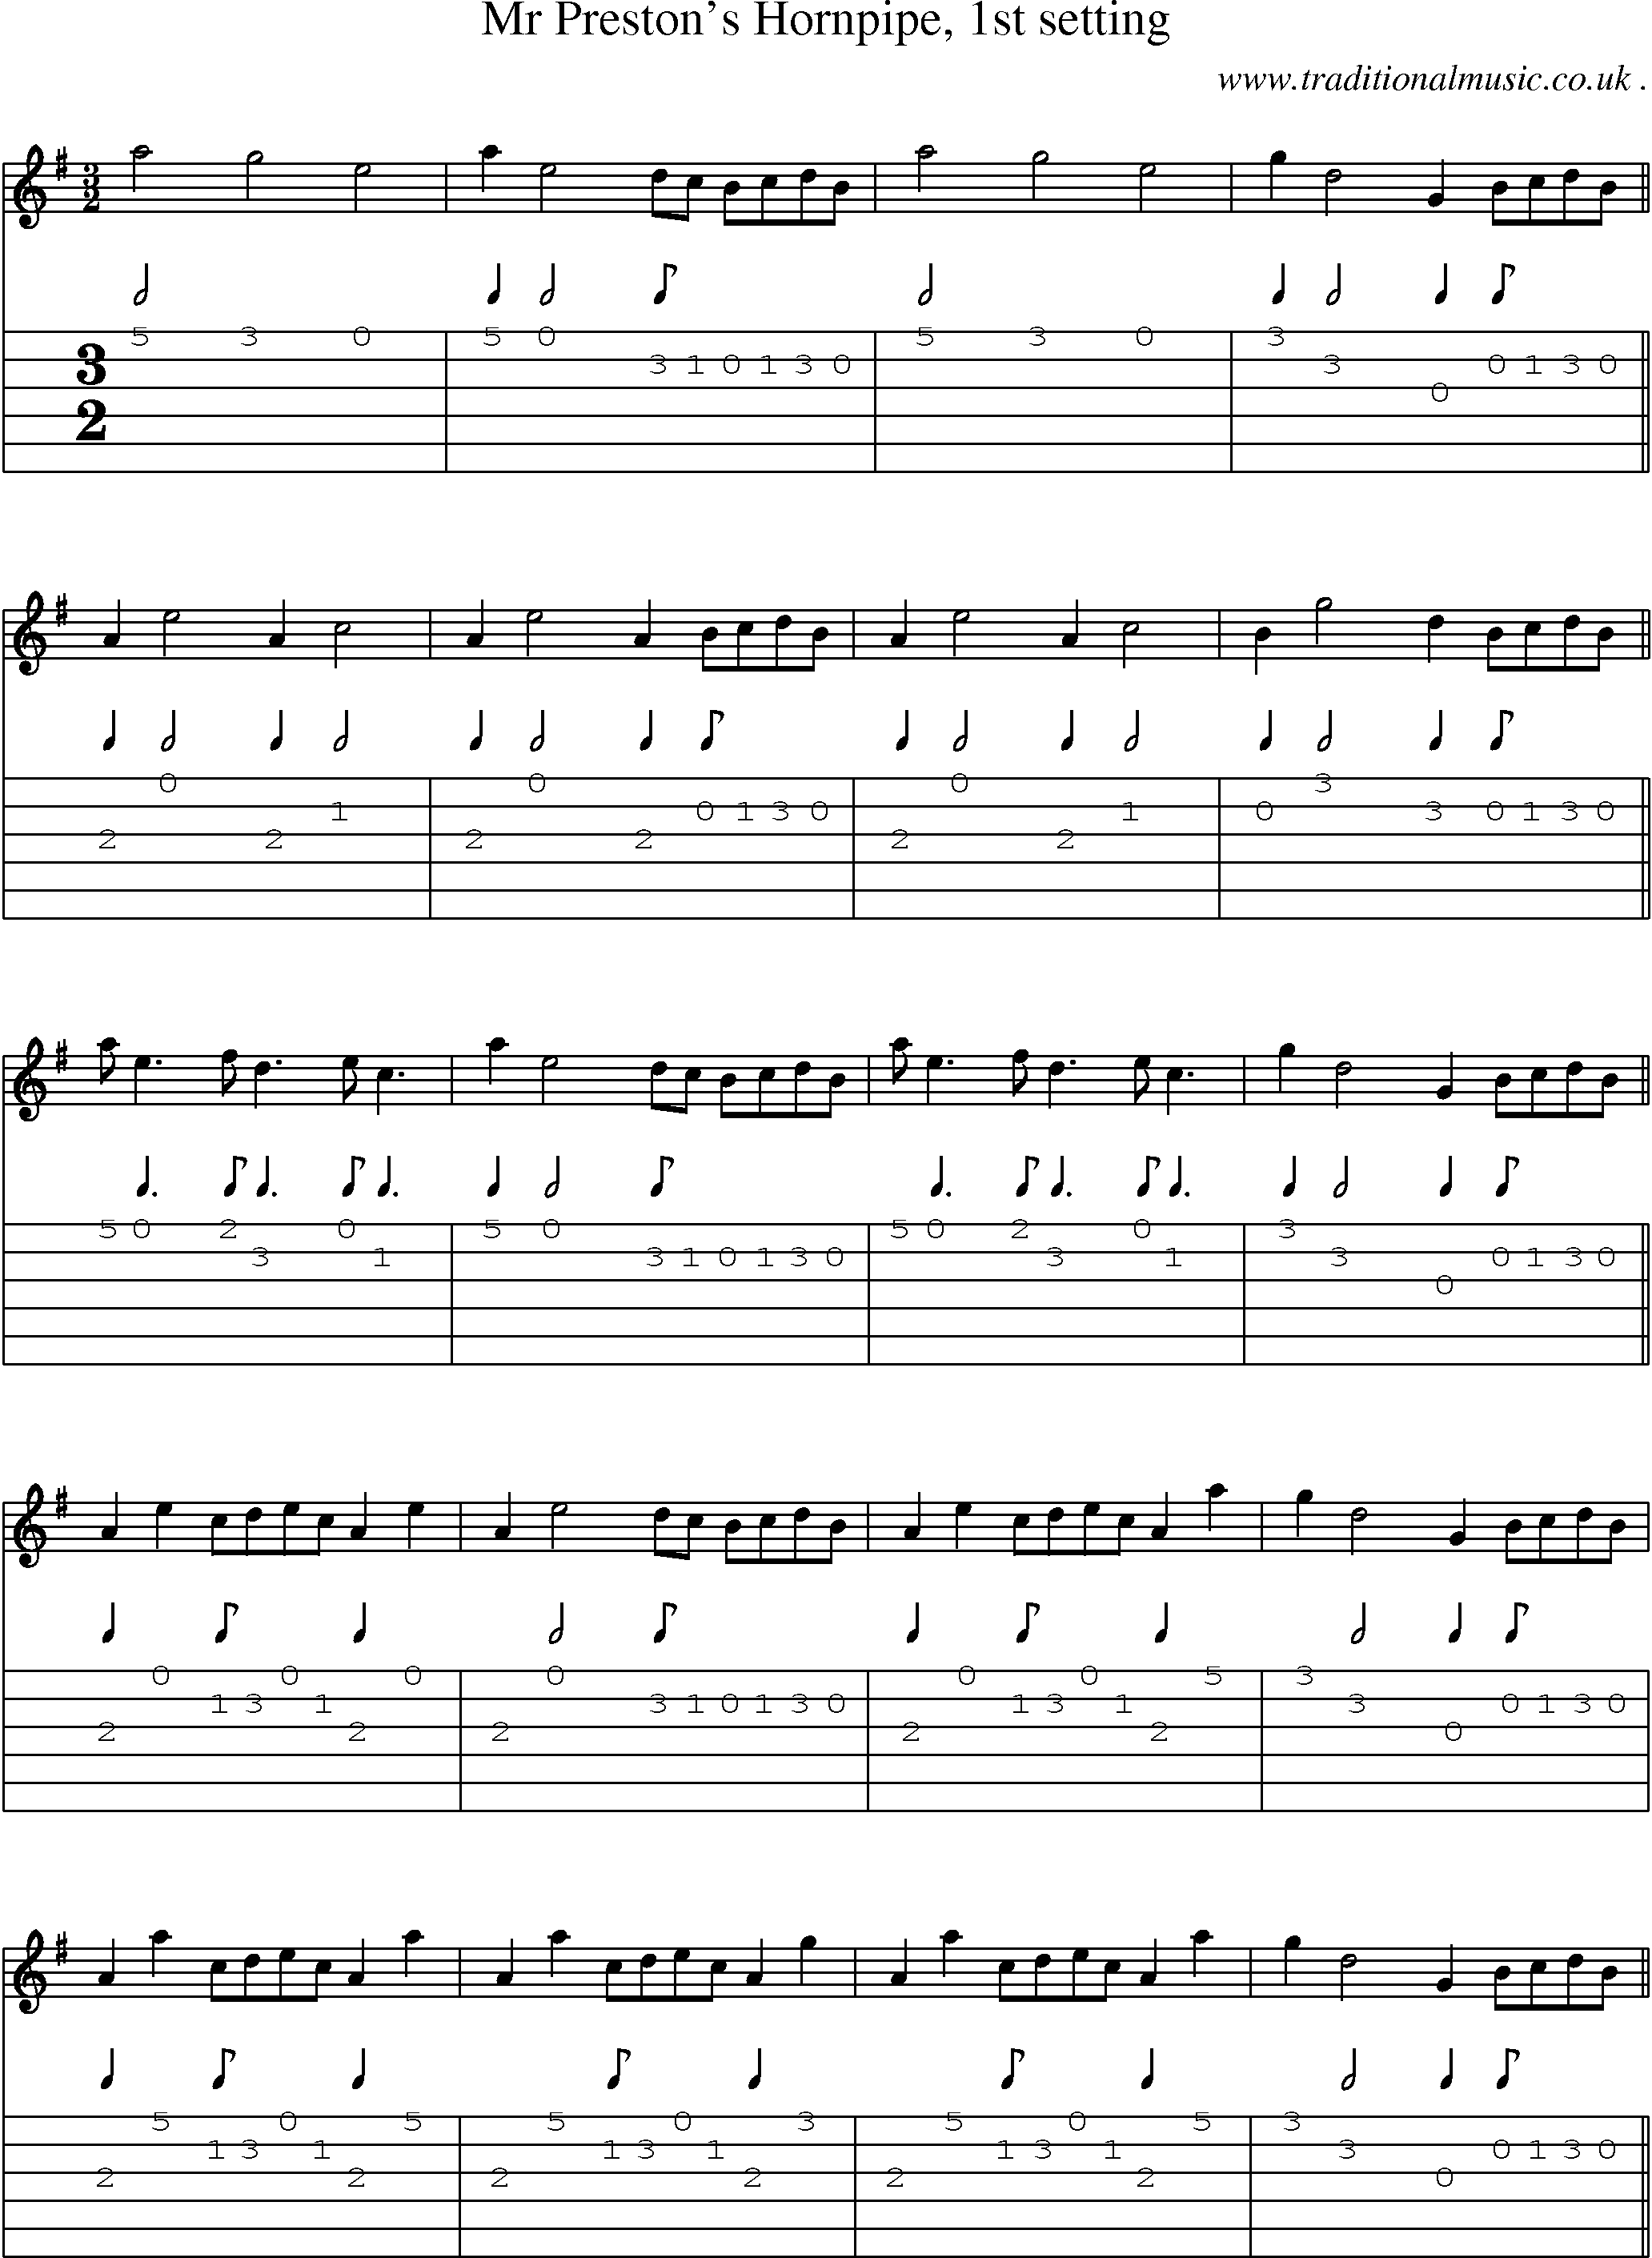 Sheet-Music and Guitar Tabs for Mr Prestons Hornpipe 1st Setting